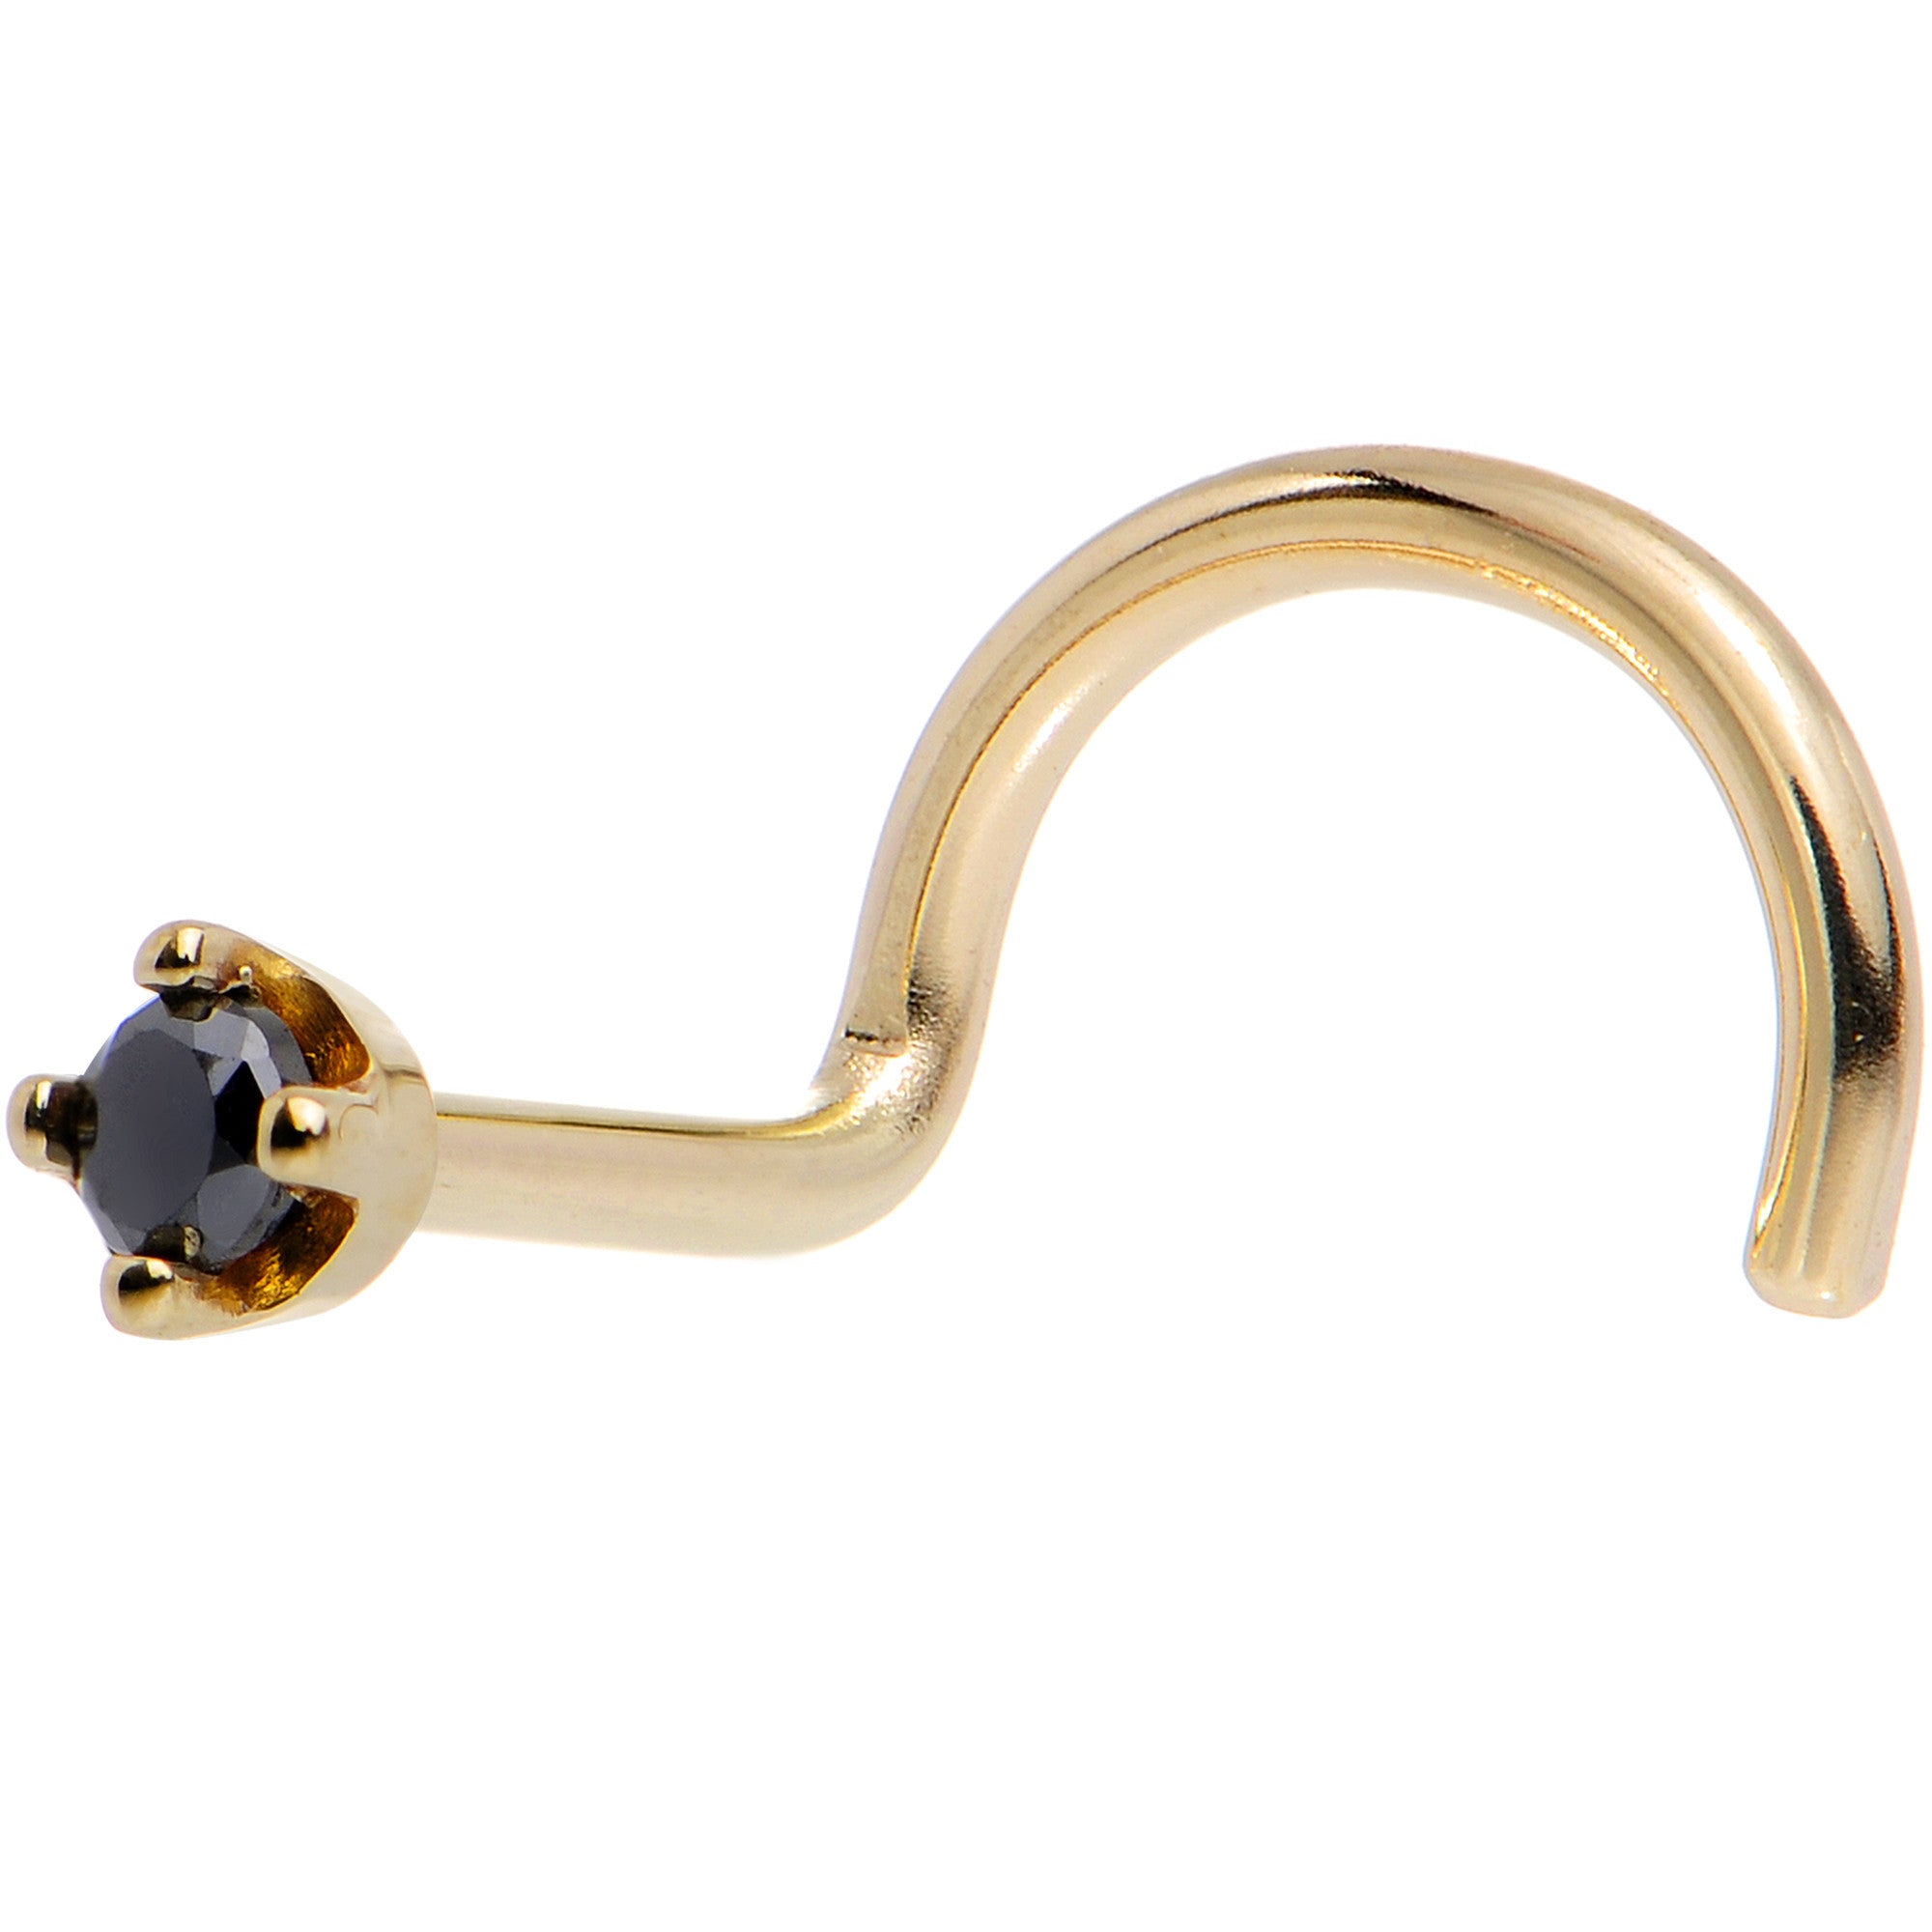 Solid 14KT Yellow Gold 1.5mm Genuine Black Diamond Nose Ring